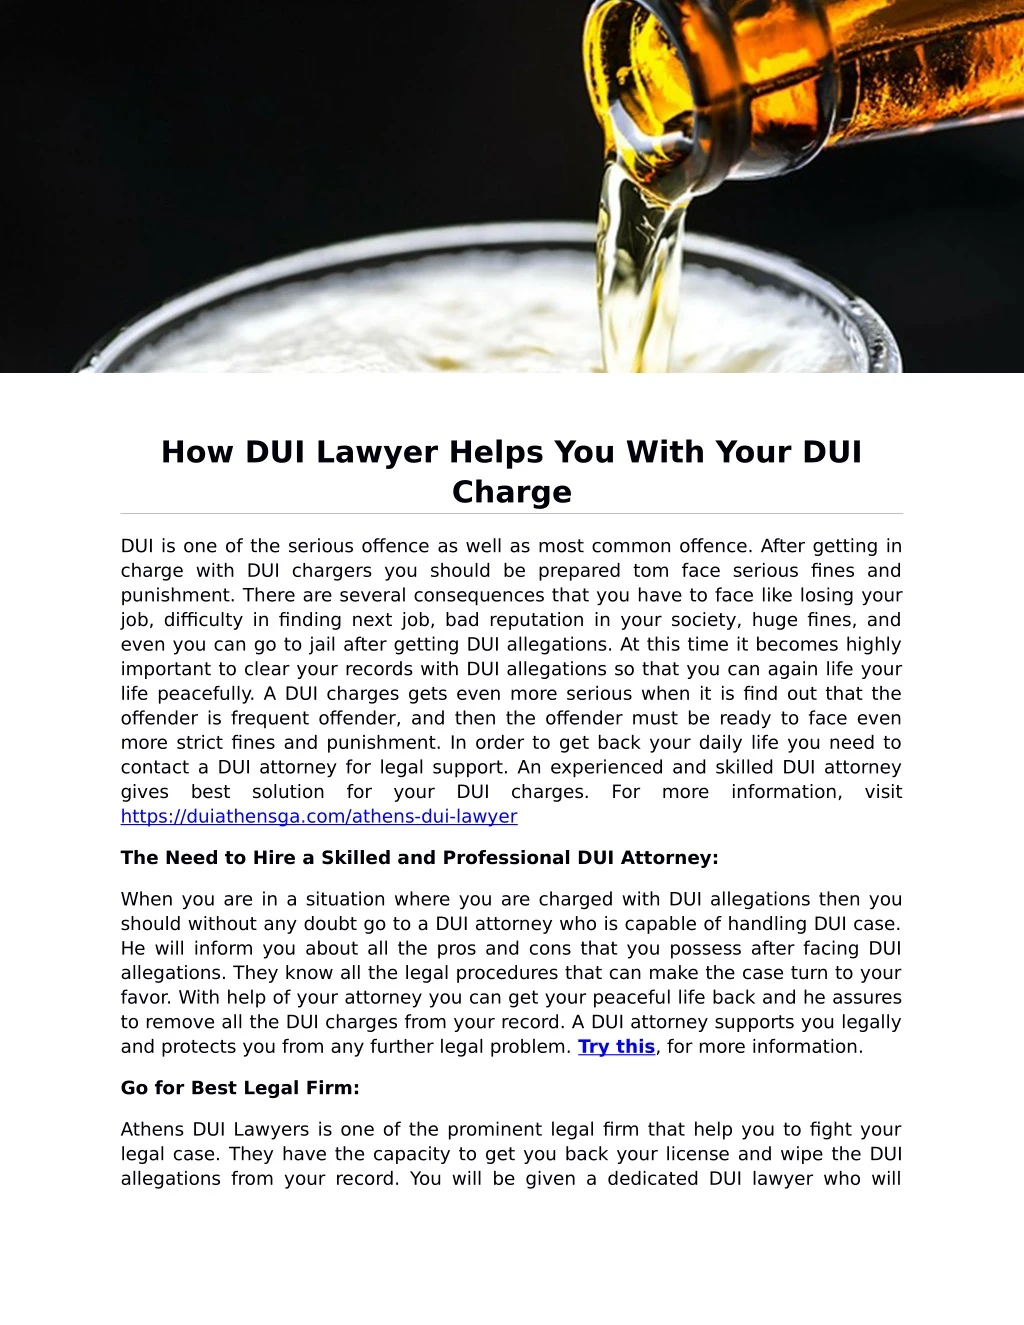 how dui lawyer helps you with your dui charge